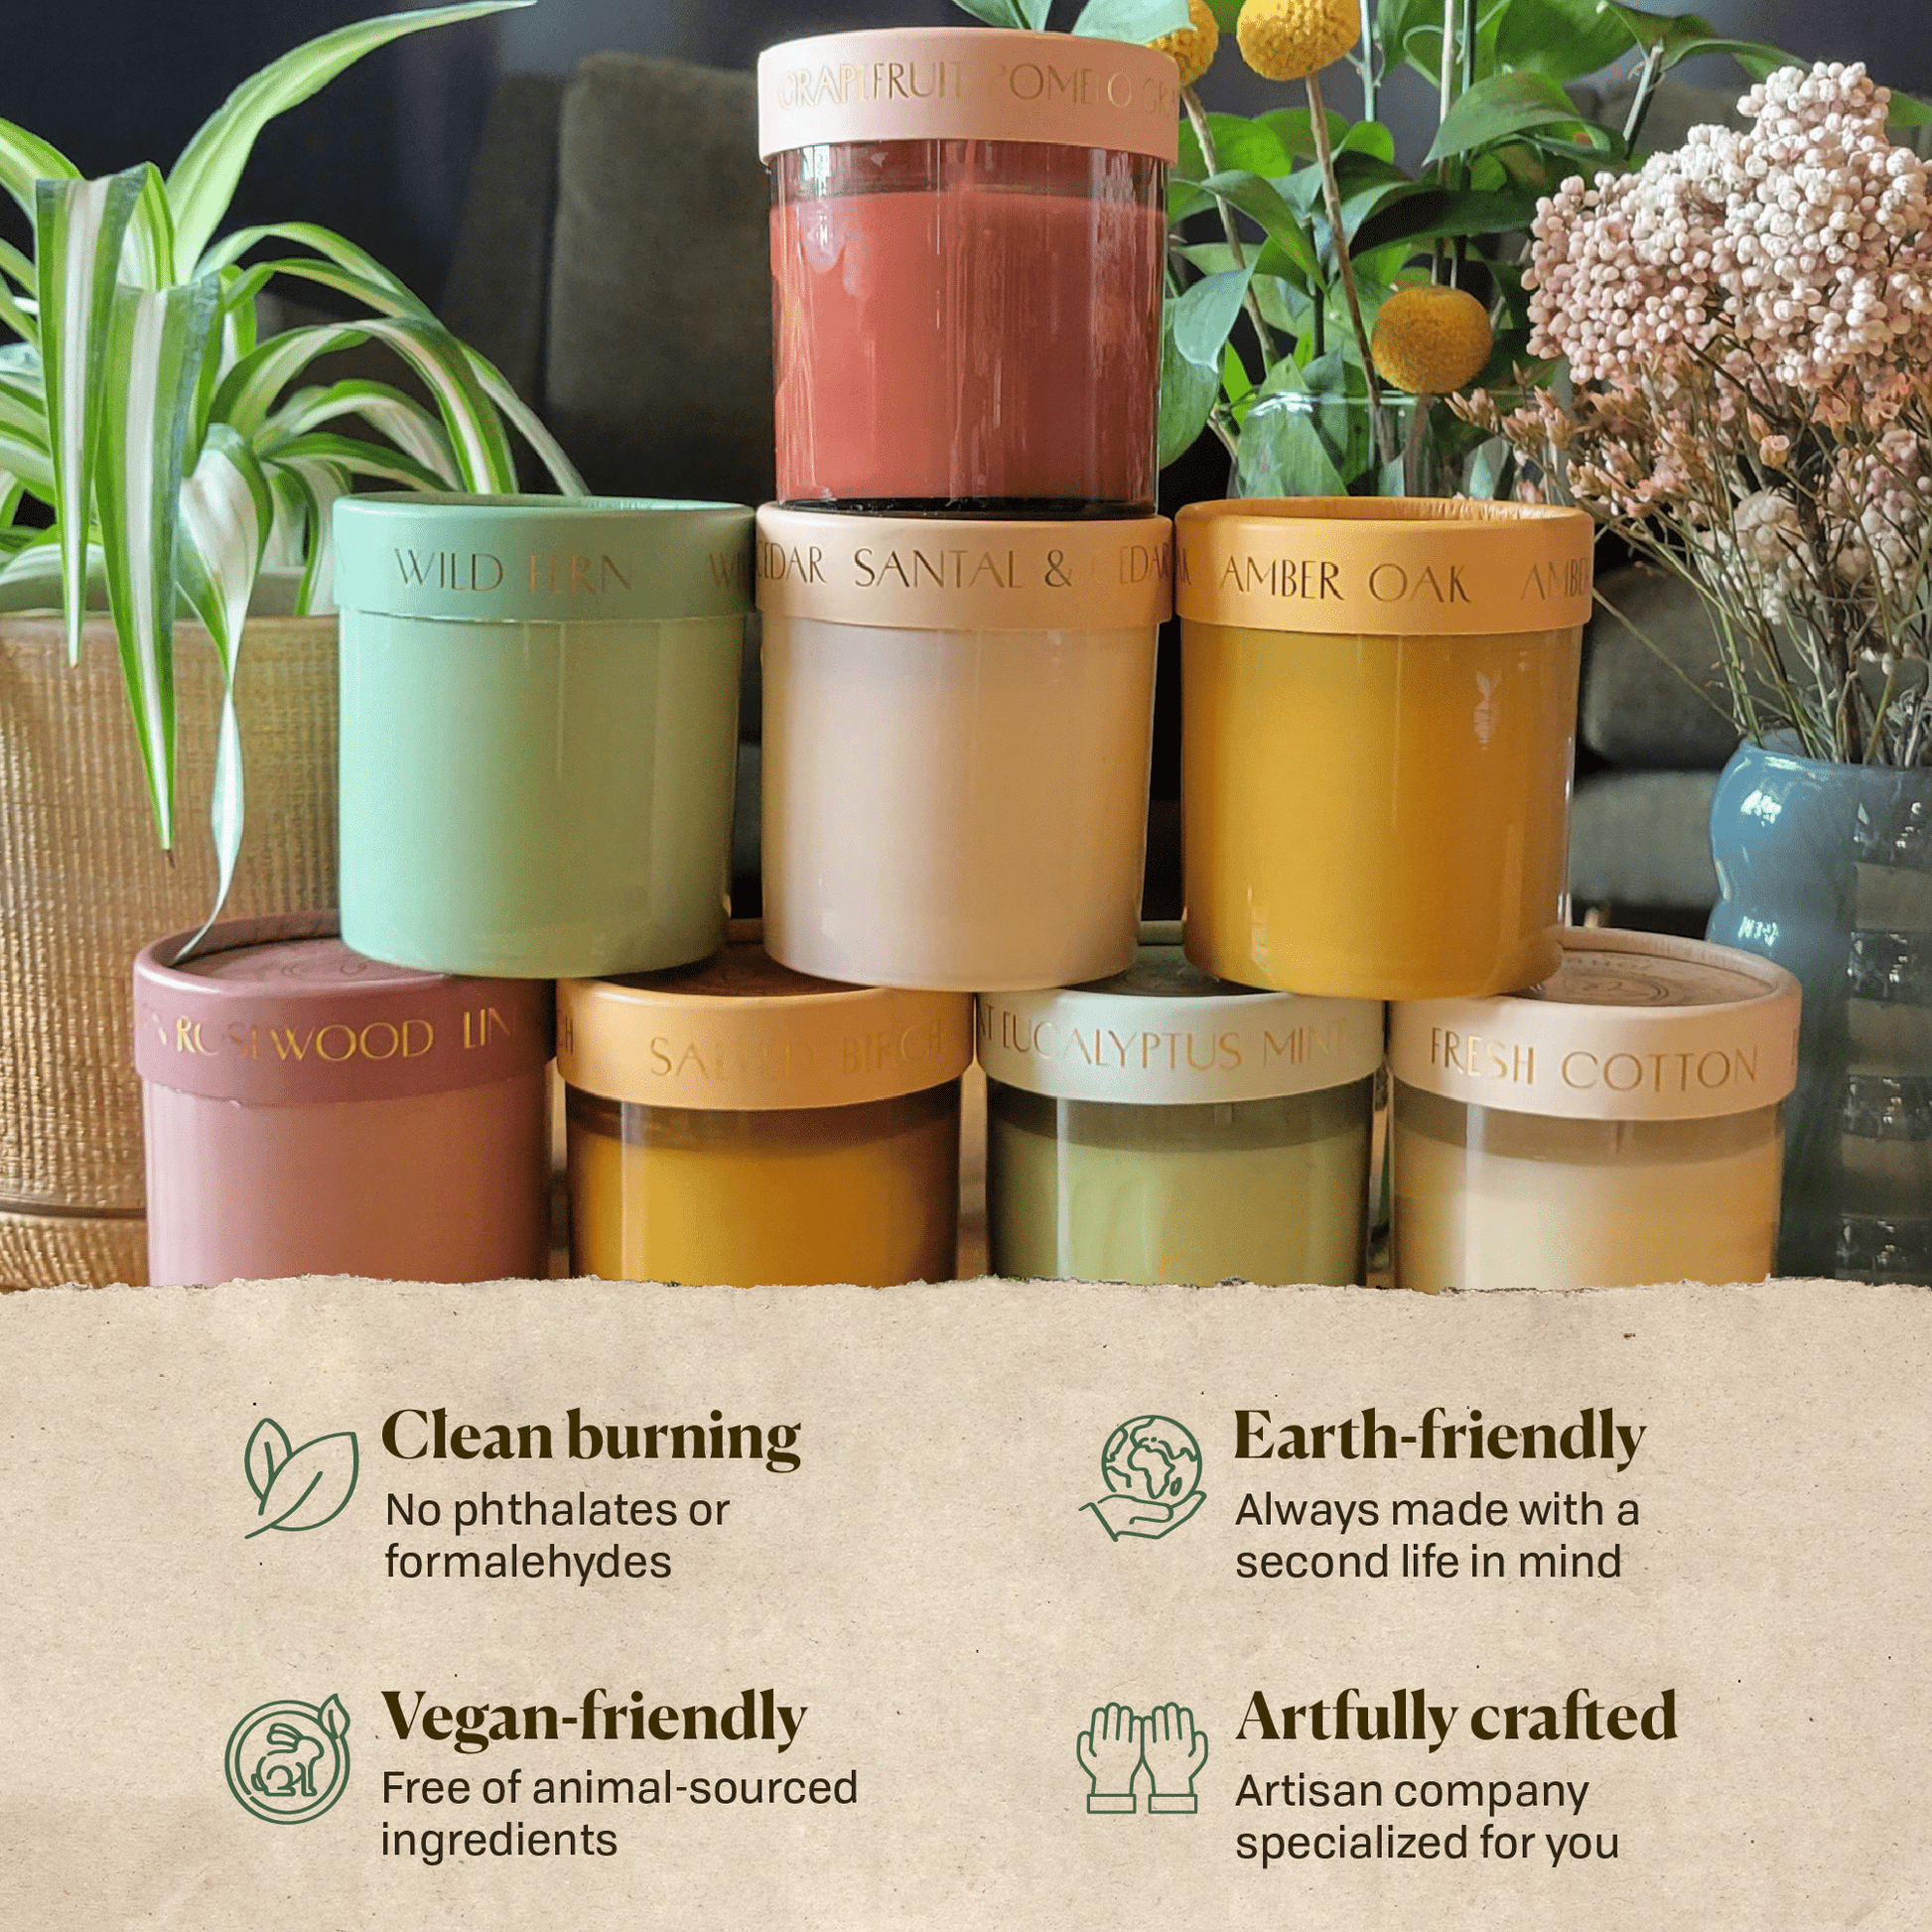  Paddywax Scented Candles Firefly Terrace Collection